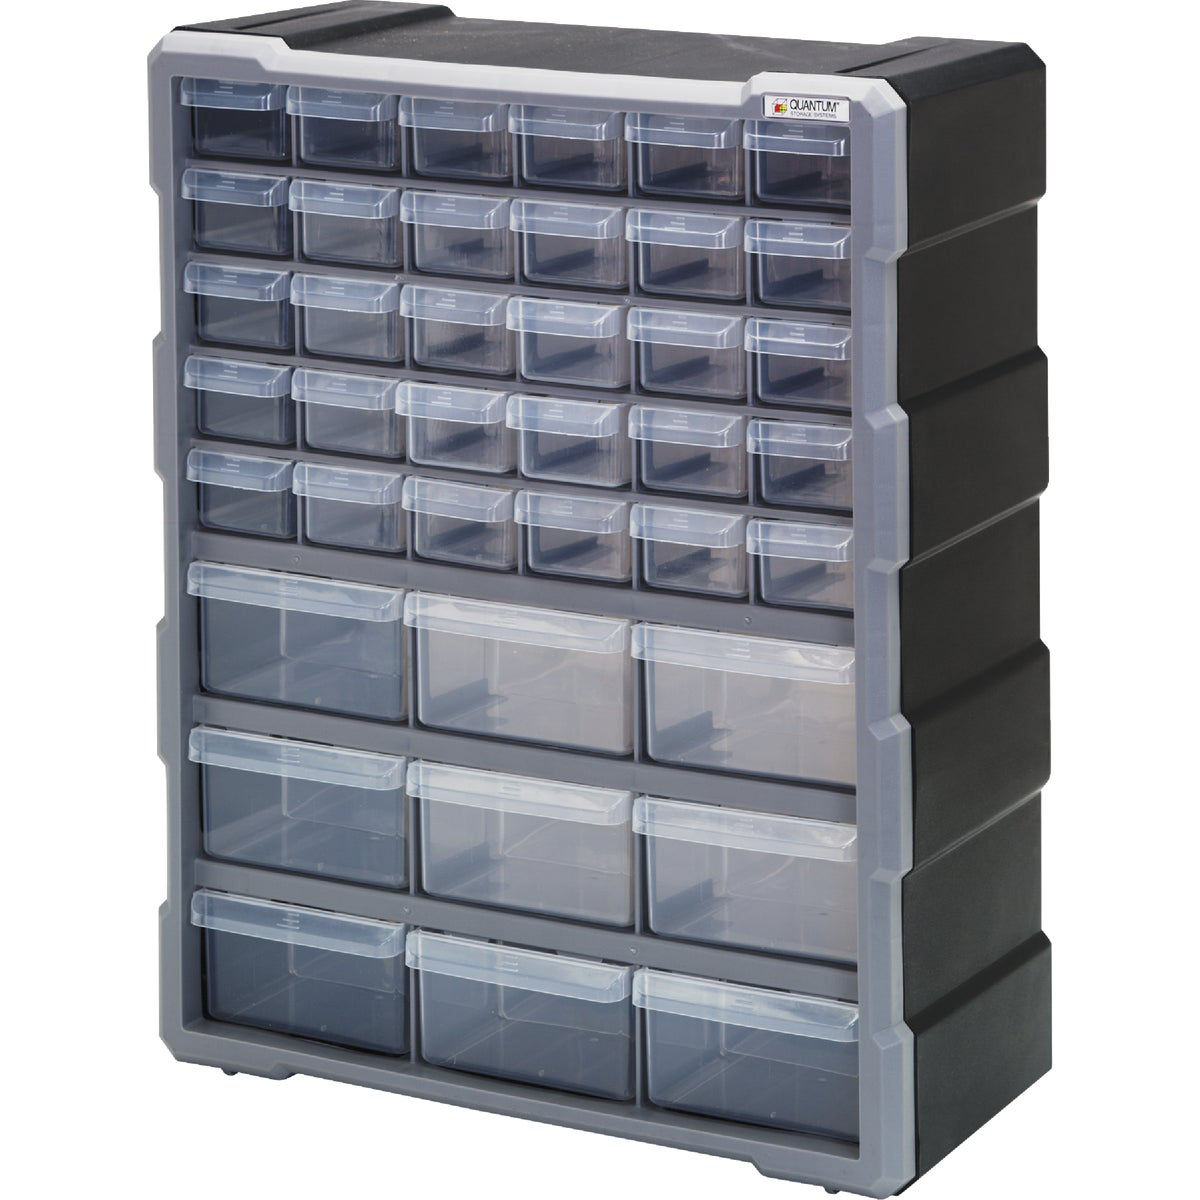 The BEST Small Parts Organizer - Small Parts Bins 